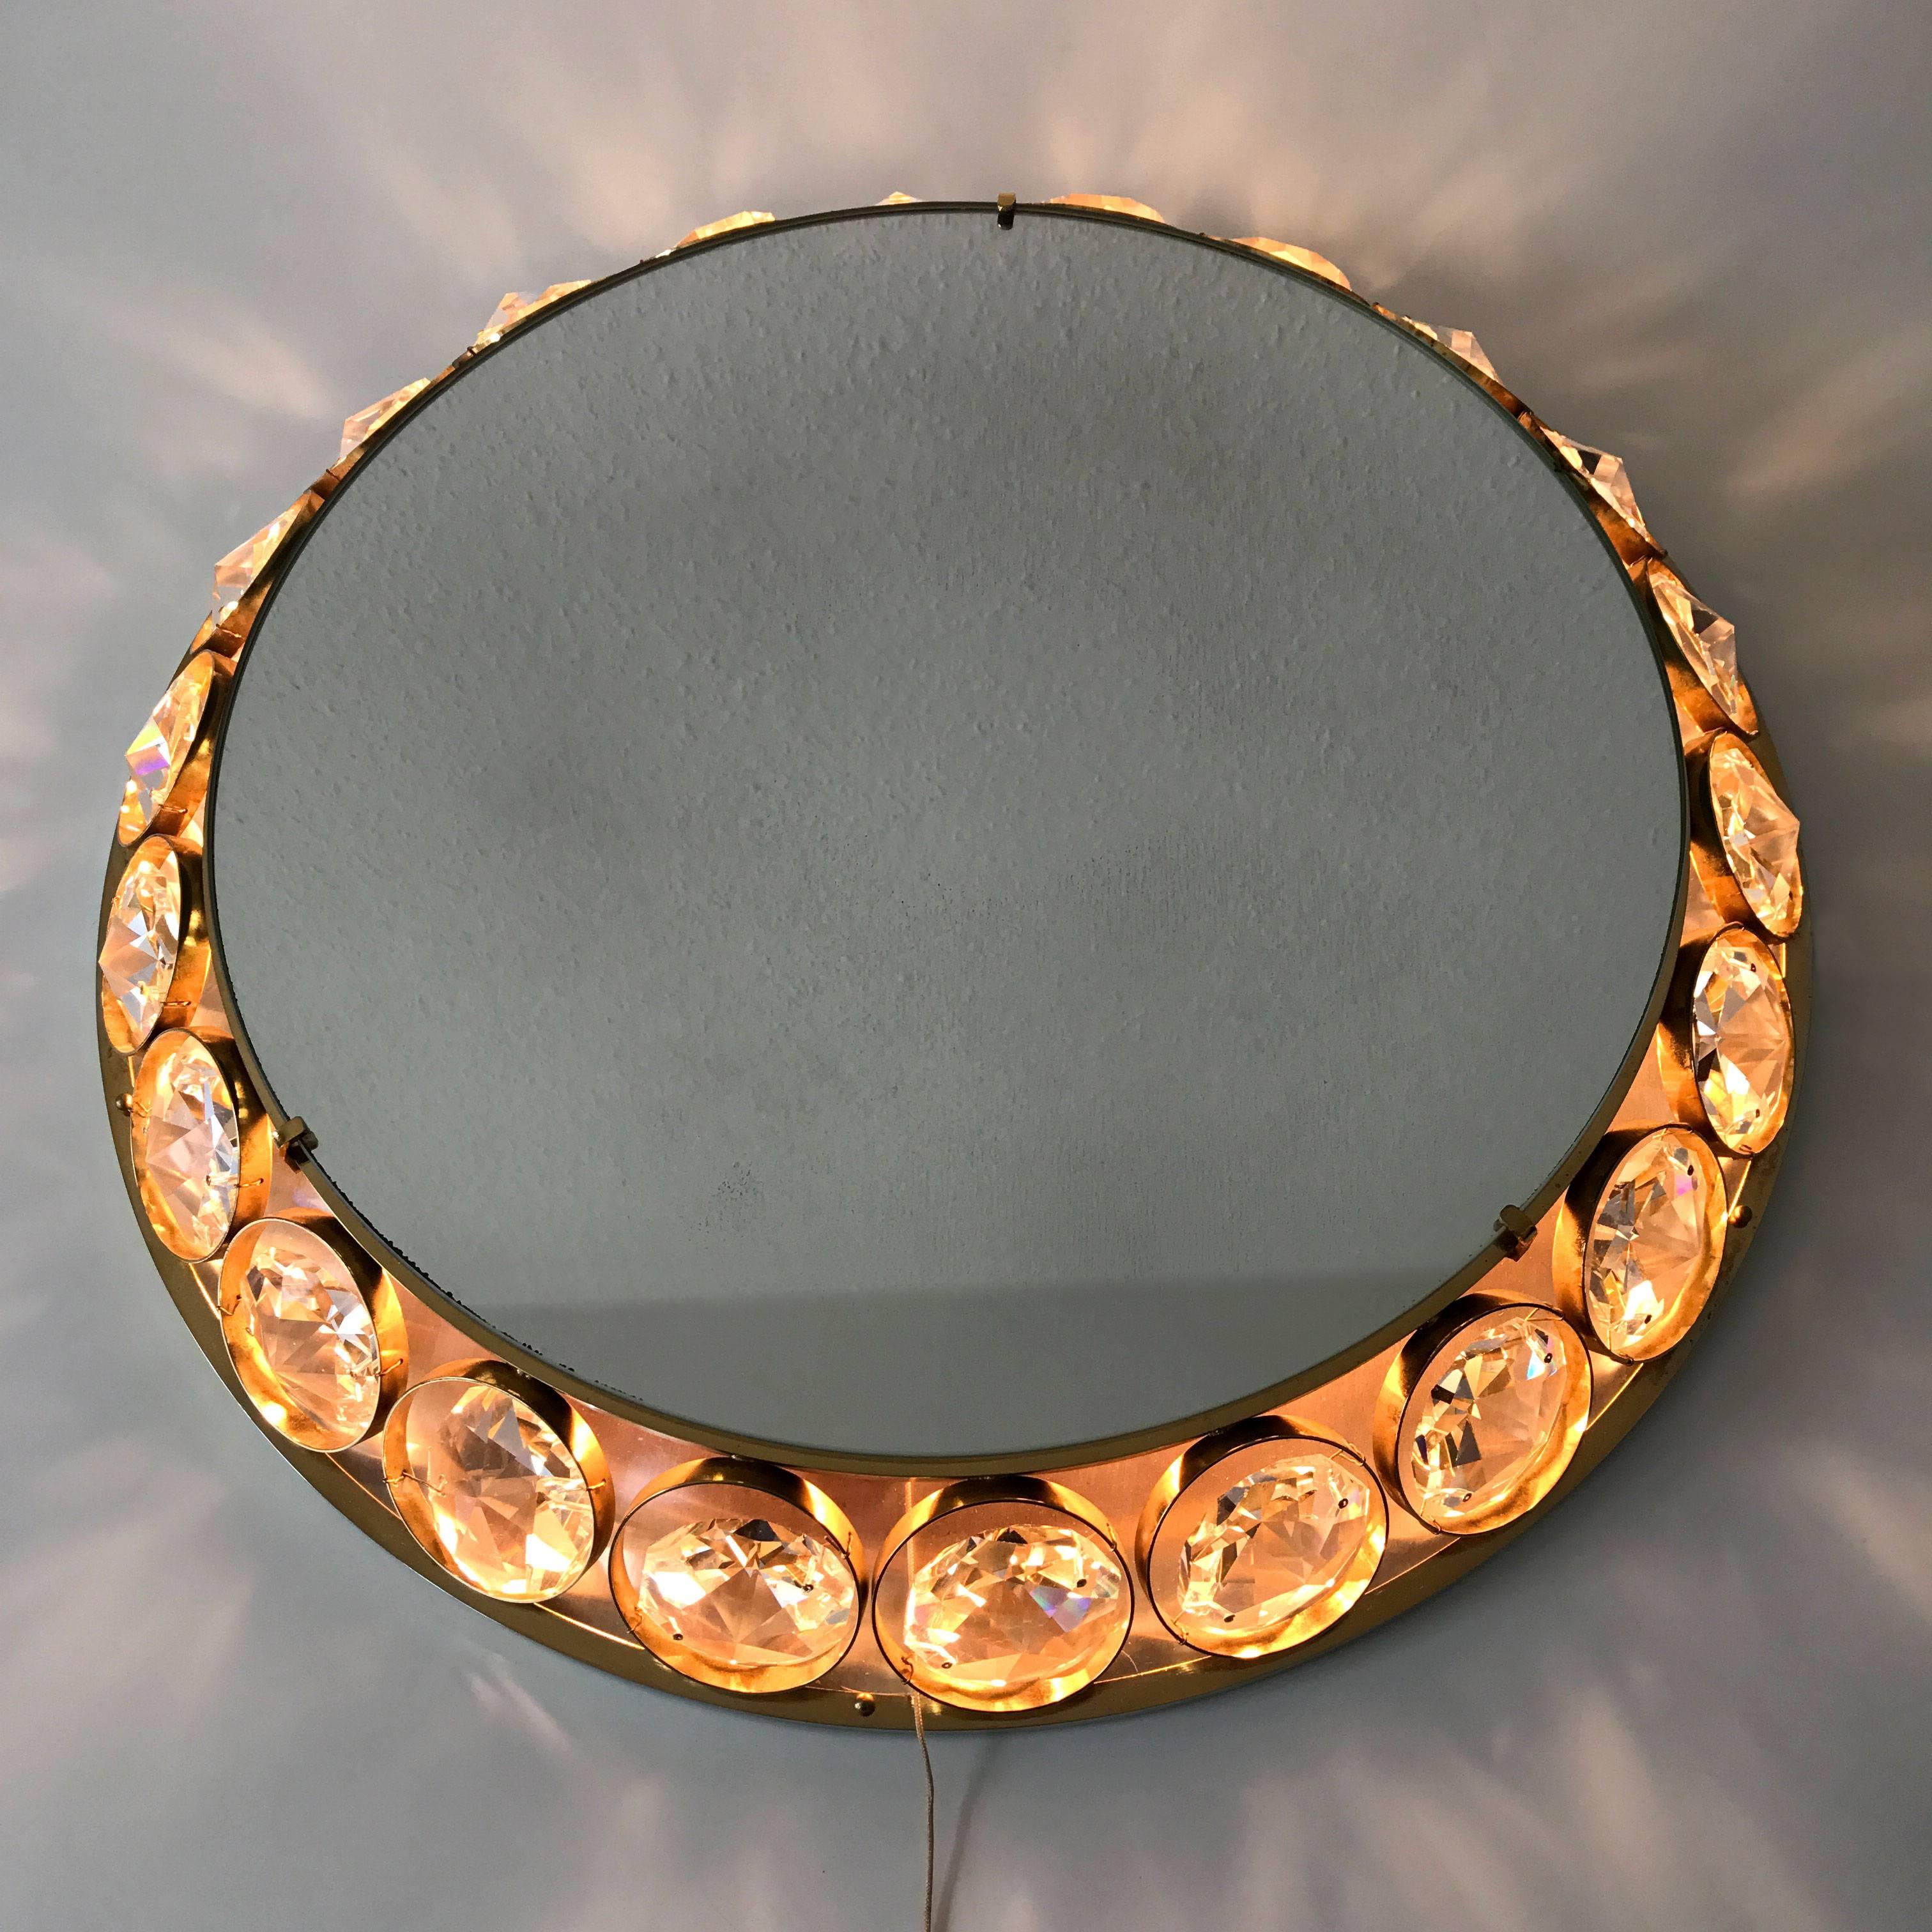 Highly decorative Mid Century Modern backlit wall mirror with a brass frame and large crystal elements. Designed and manufactured by Palwa, Germany, 1960s. 

Executed in crystal glass elements, gilt brass and mirrored glass, the wall mirror needs 6